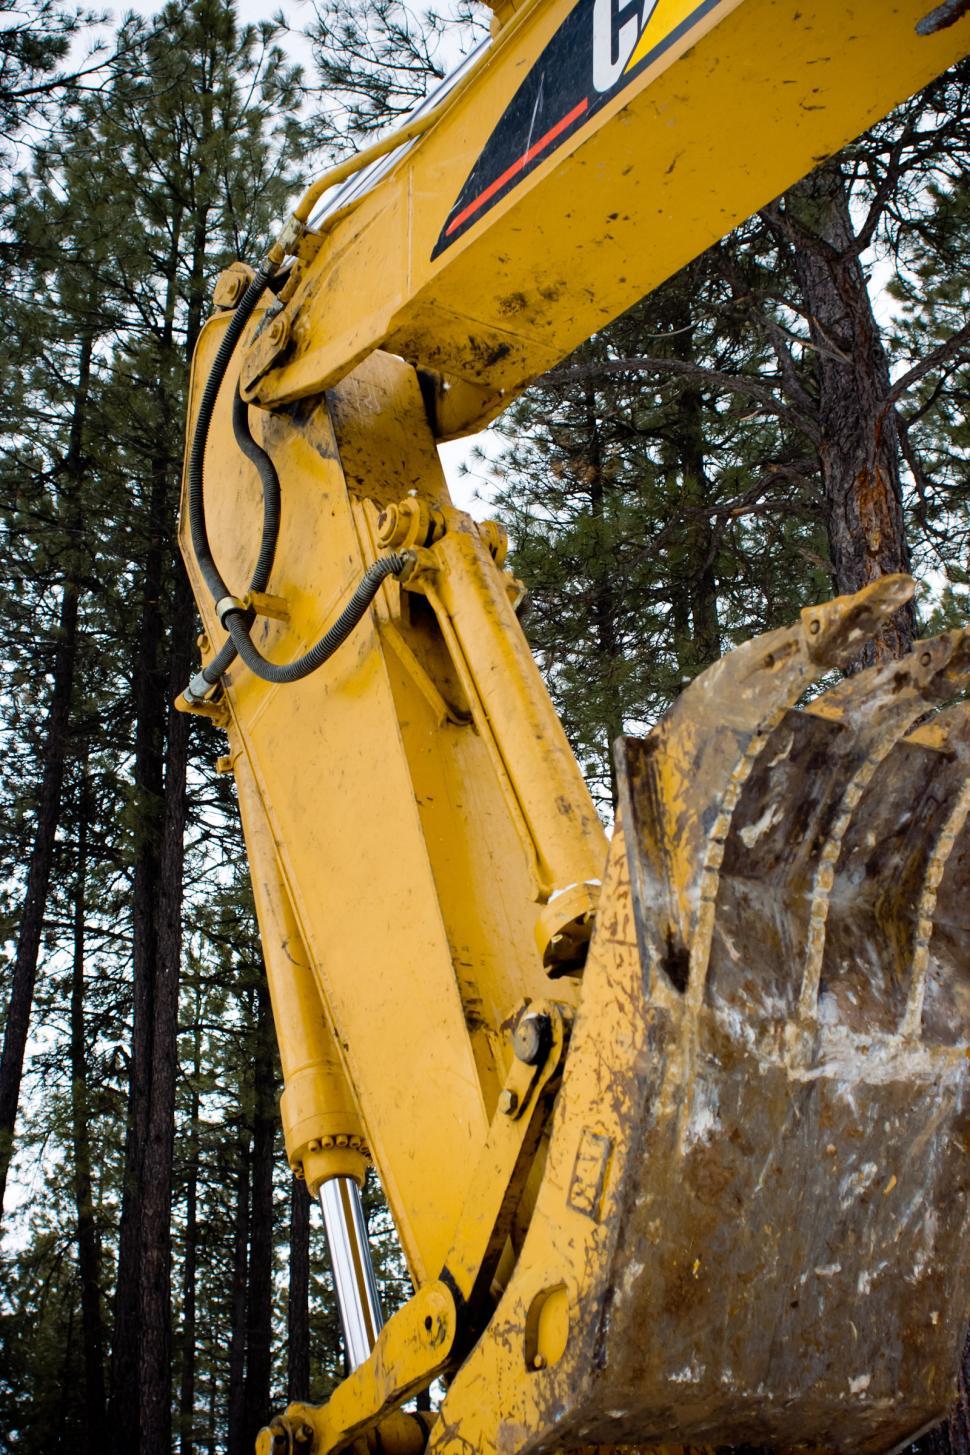 Download Free Stock Photo of Backhoe 